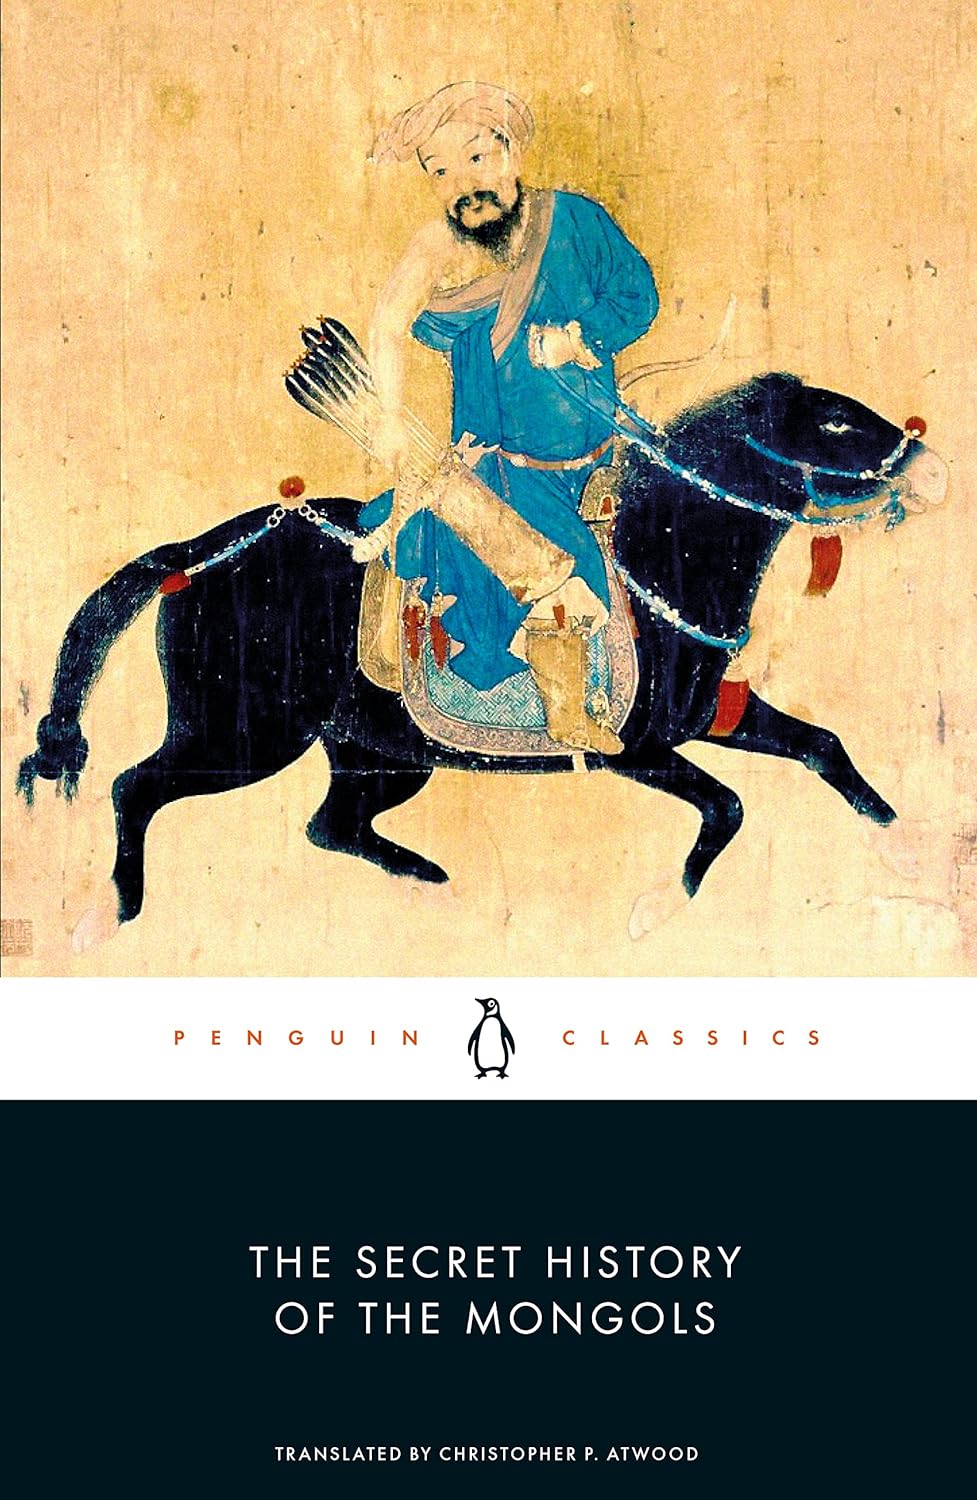 Photo Of Book Cover For The Book Entitled The Secret History Of The Mongols